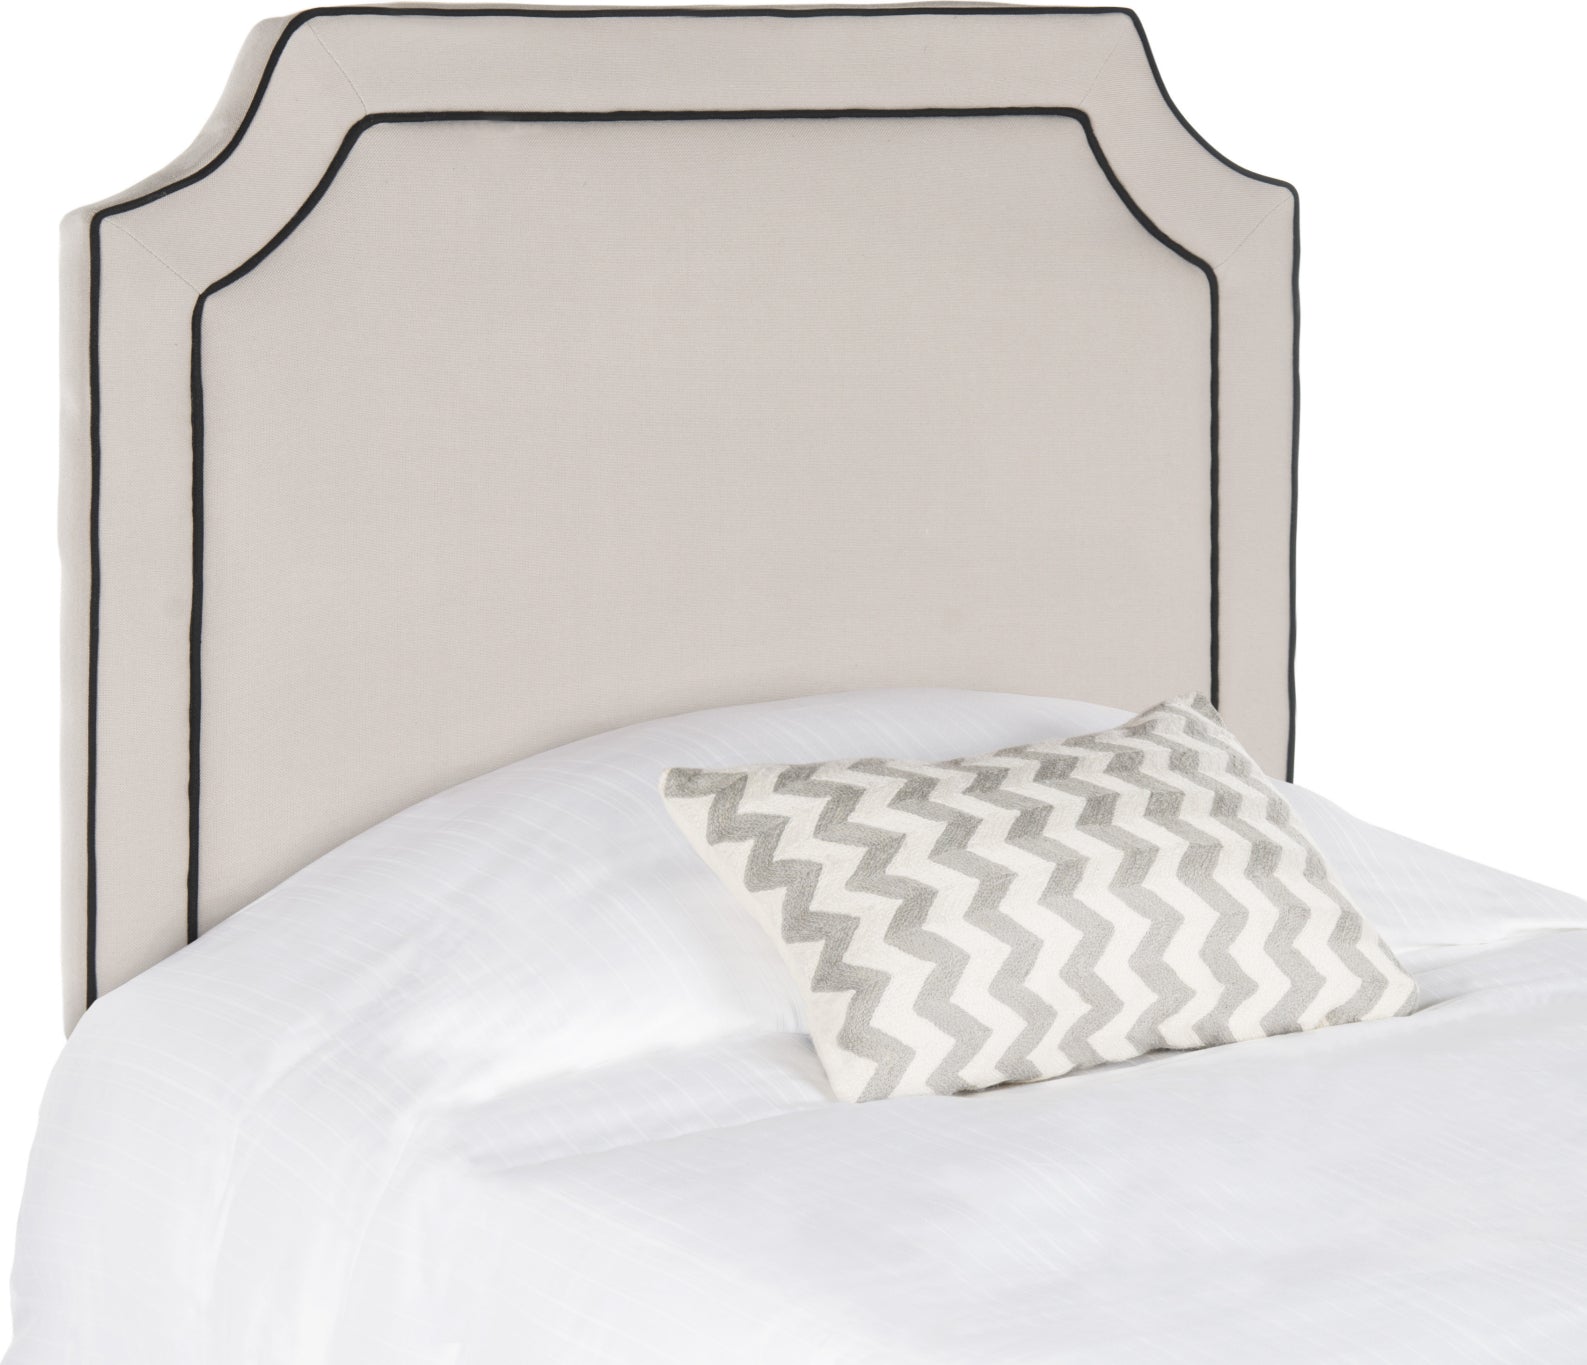 Safavieh Dane Taupe and Black Welt Piping Headboard Taupe/Black Bedding main image